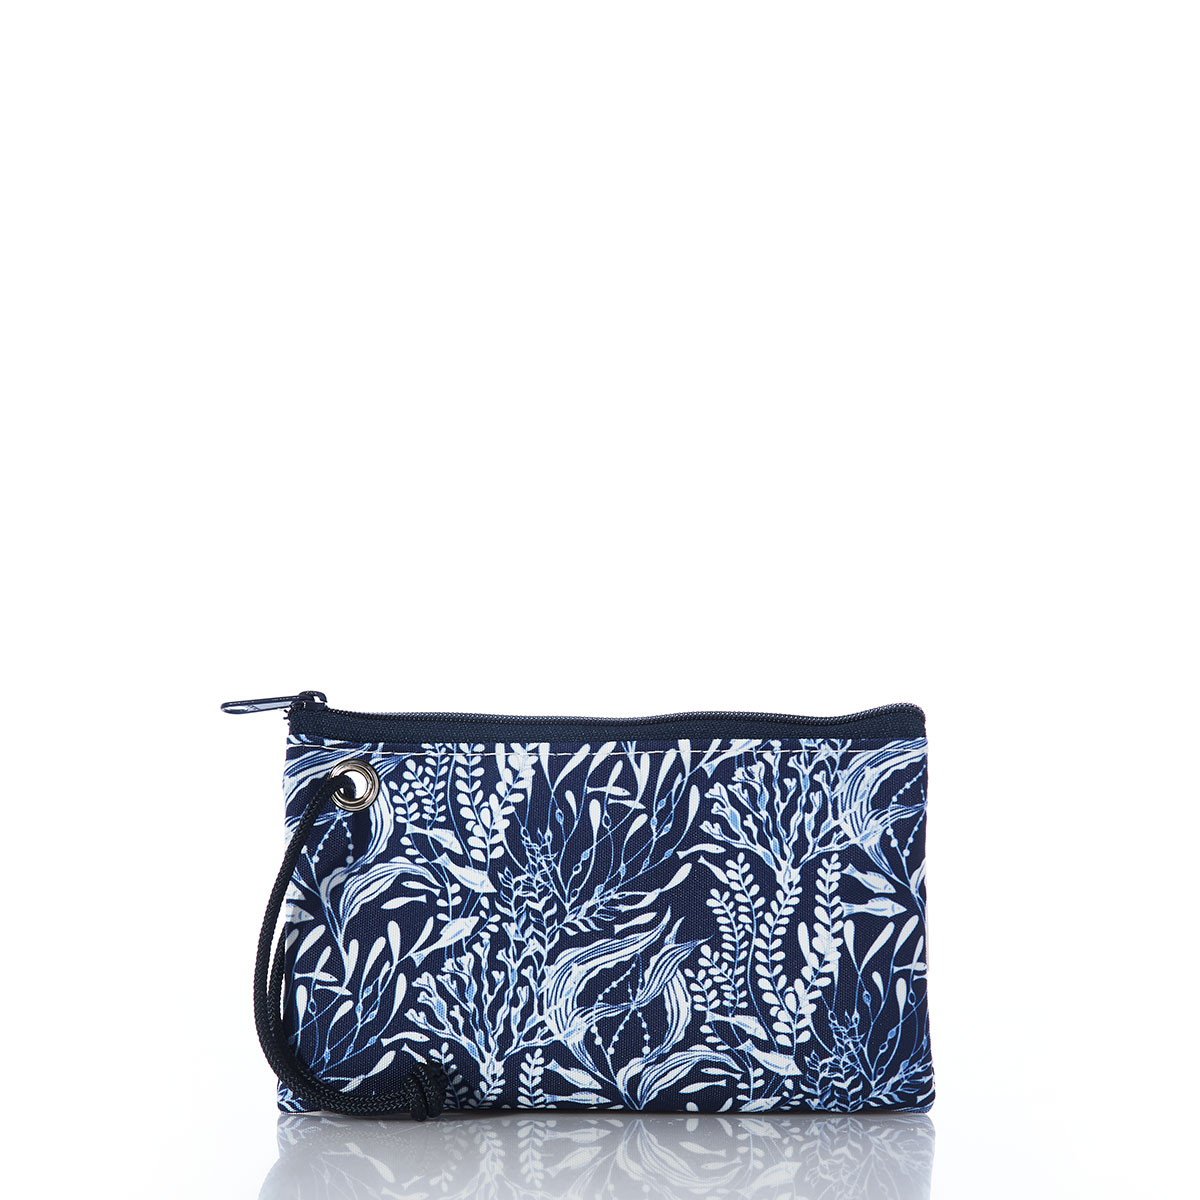 little fish swim among various types of seaweed in shades of navy and white on a recycled sail cloth wristlet, back view